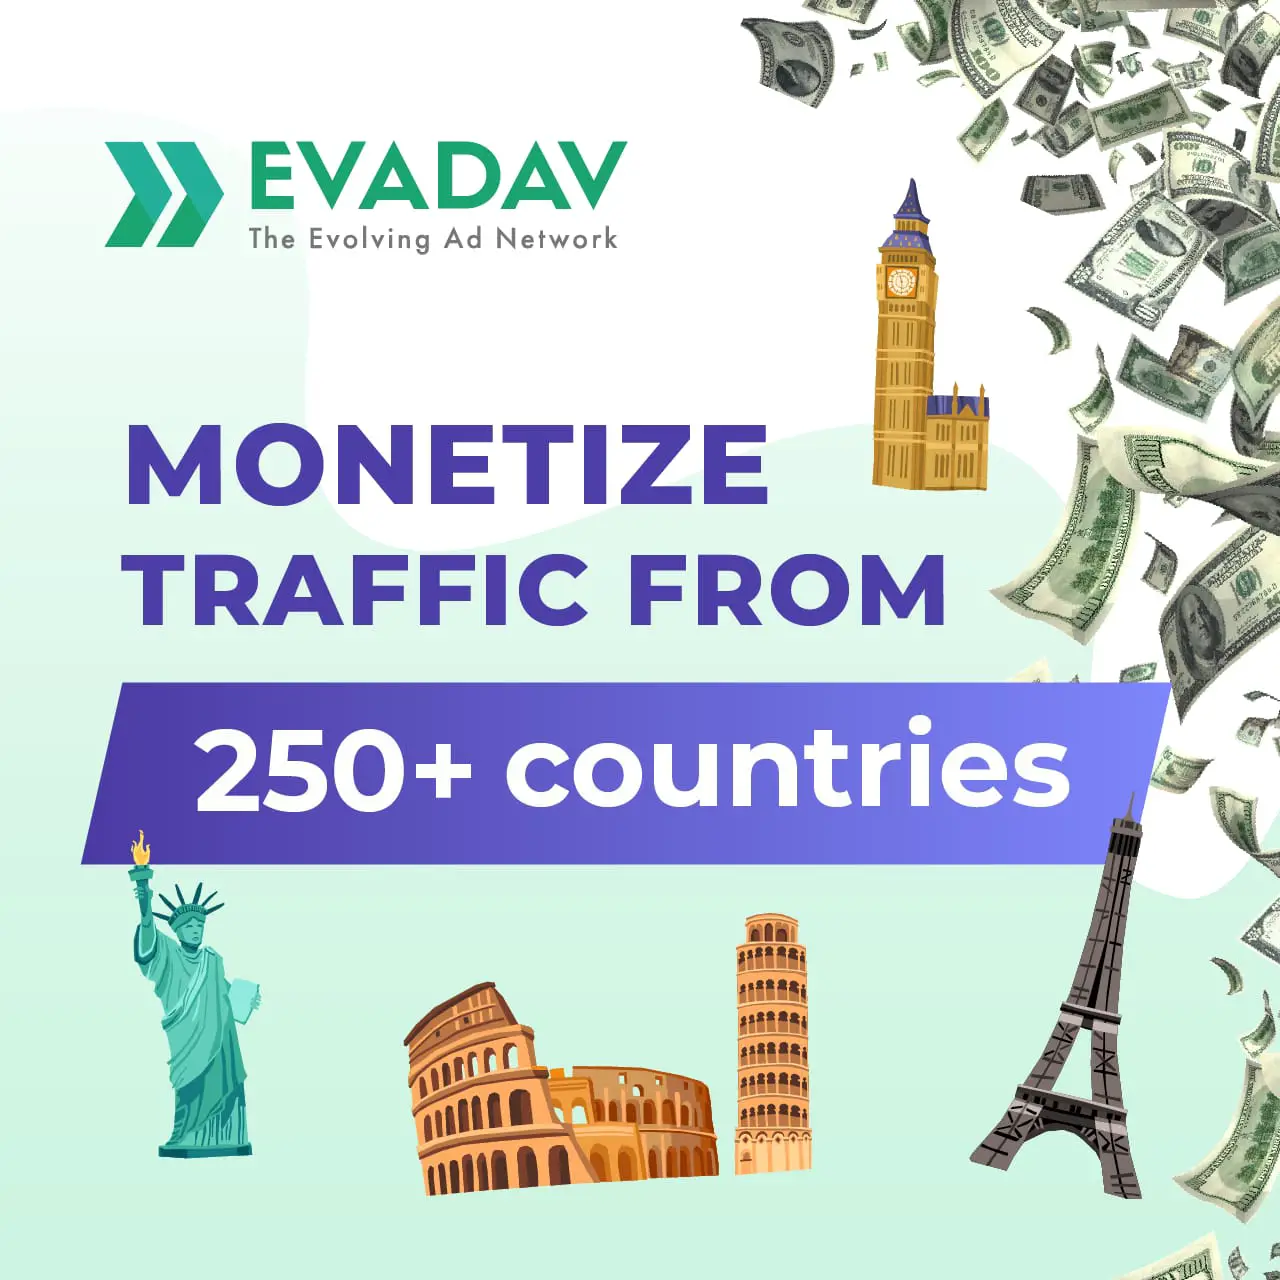 Monetize traffic from 250+ countries